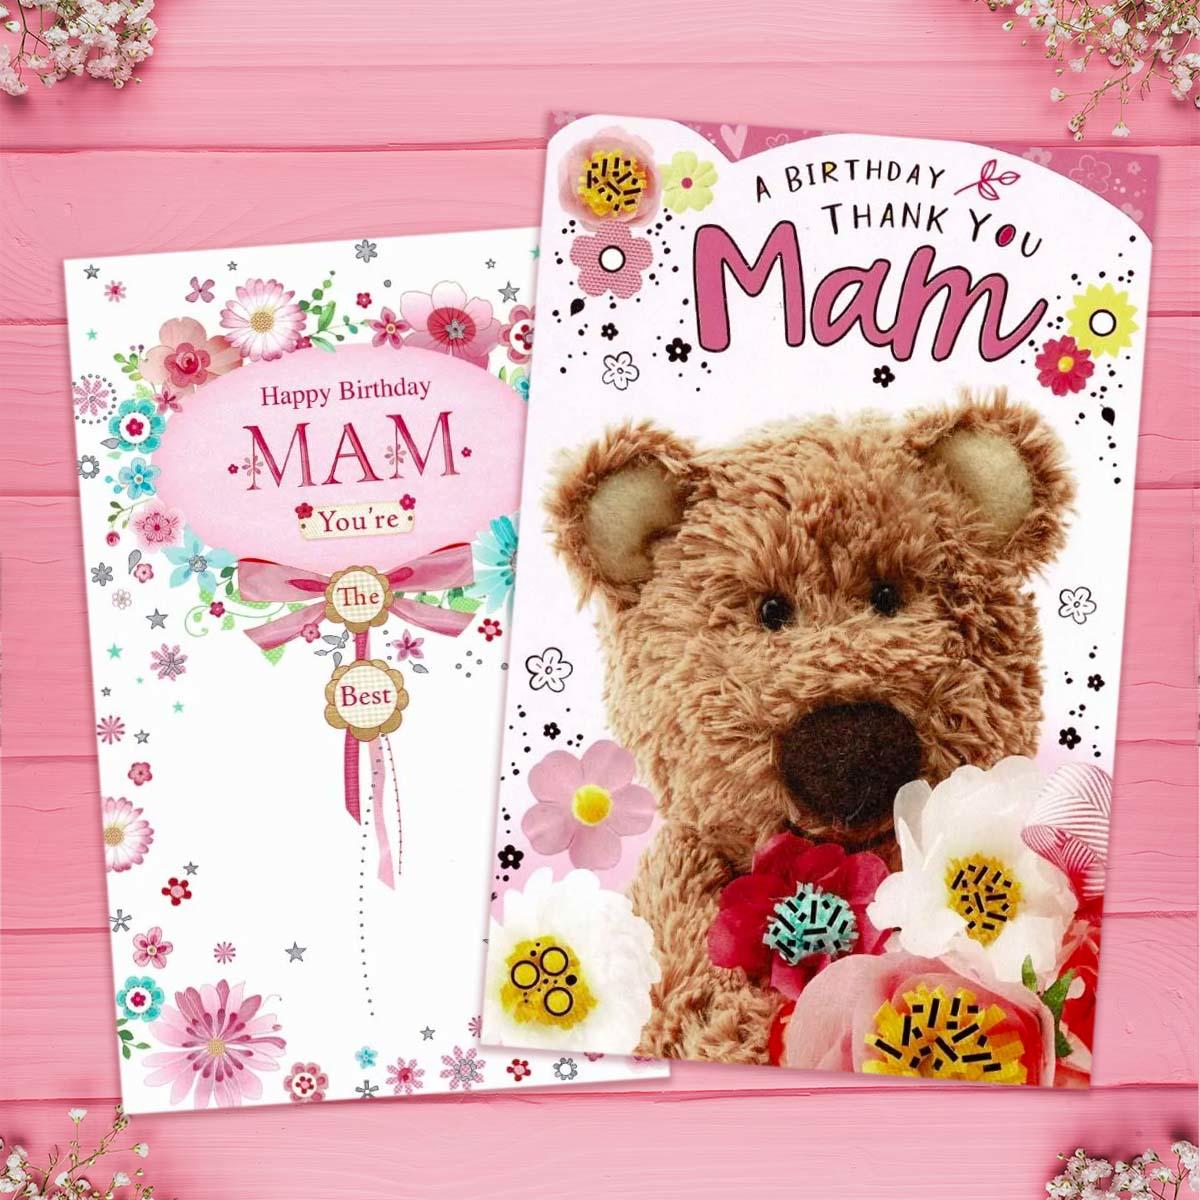 A Selection Of Cards To Show The Depth Of Range In Our Mam Birthday Section